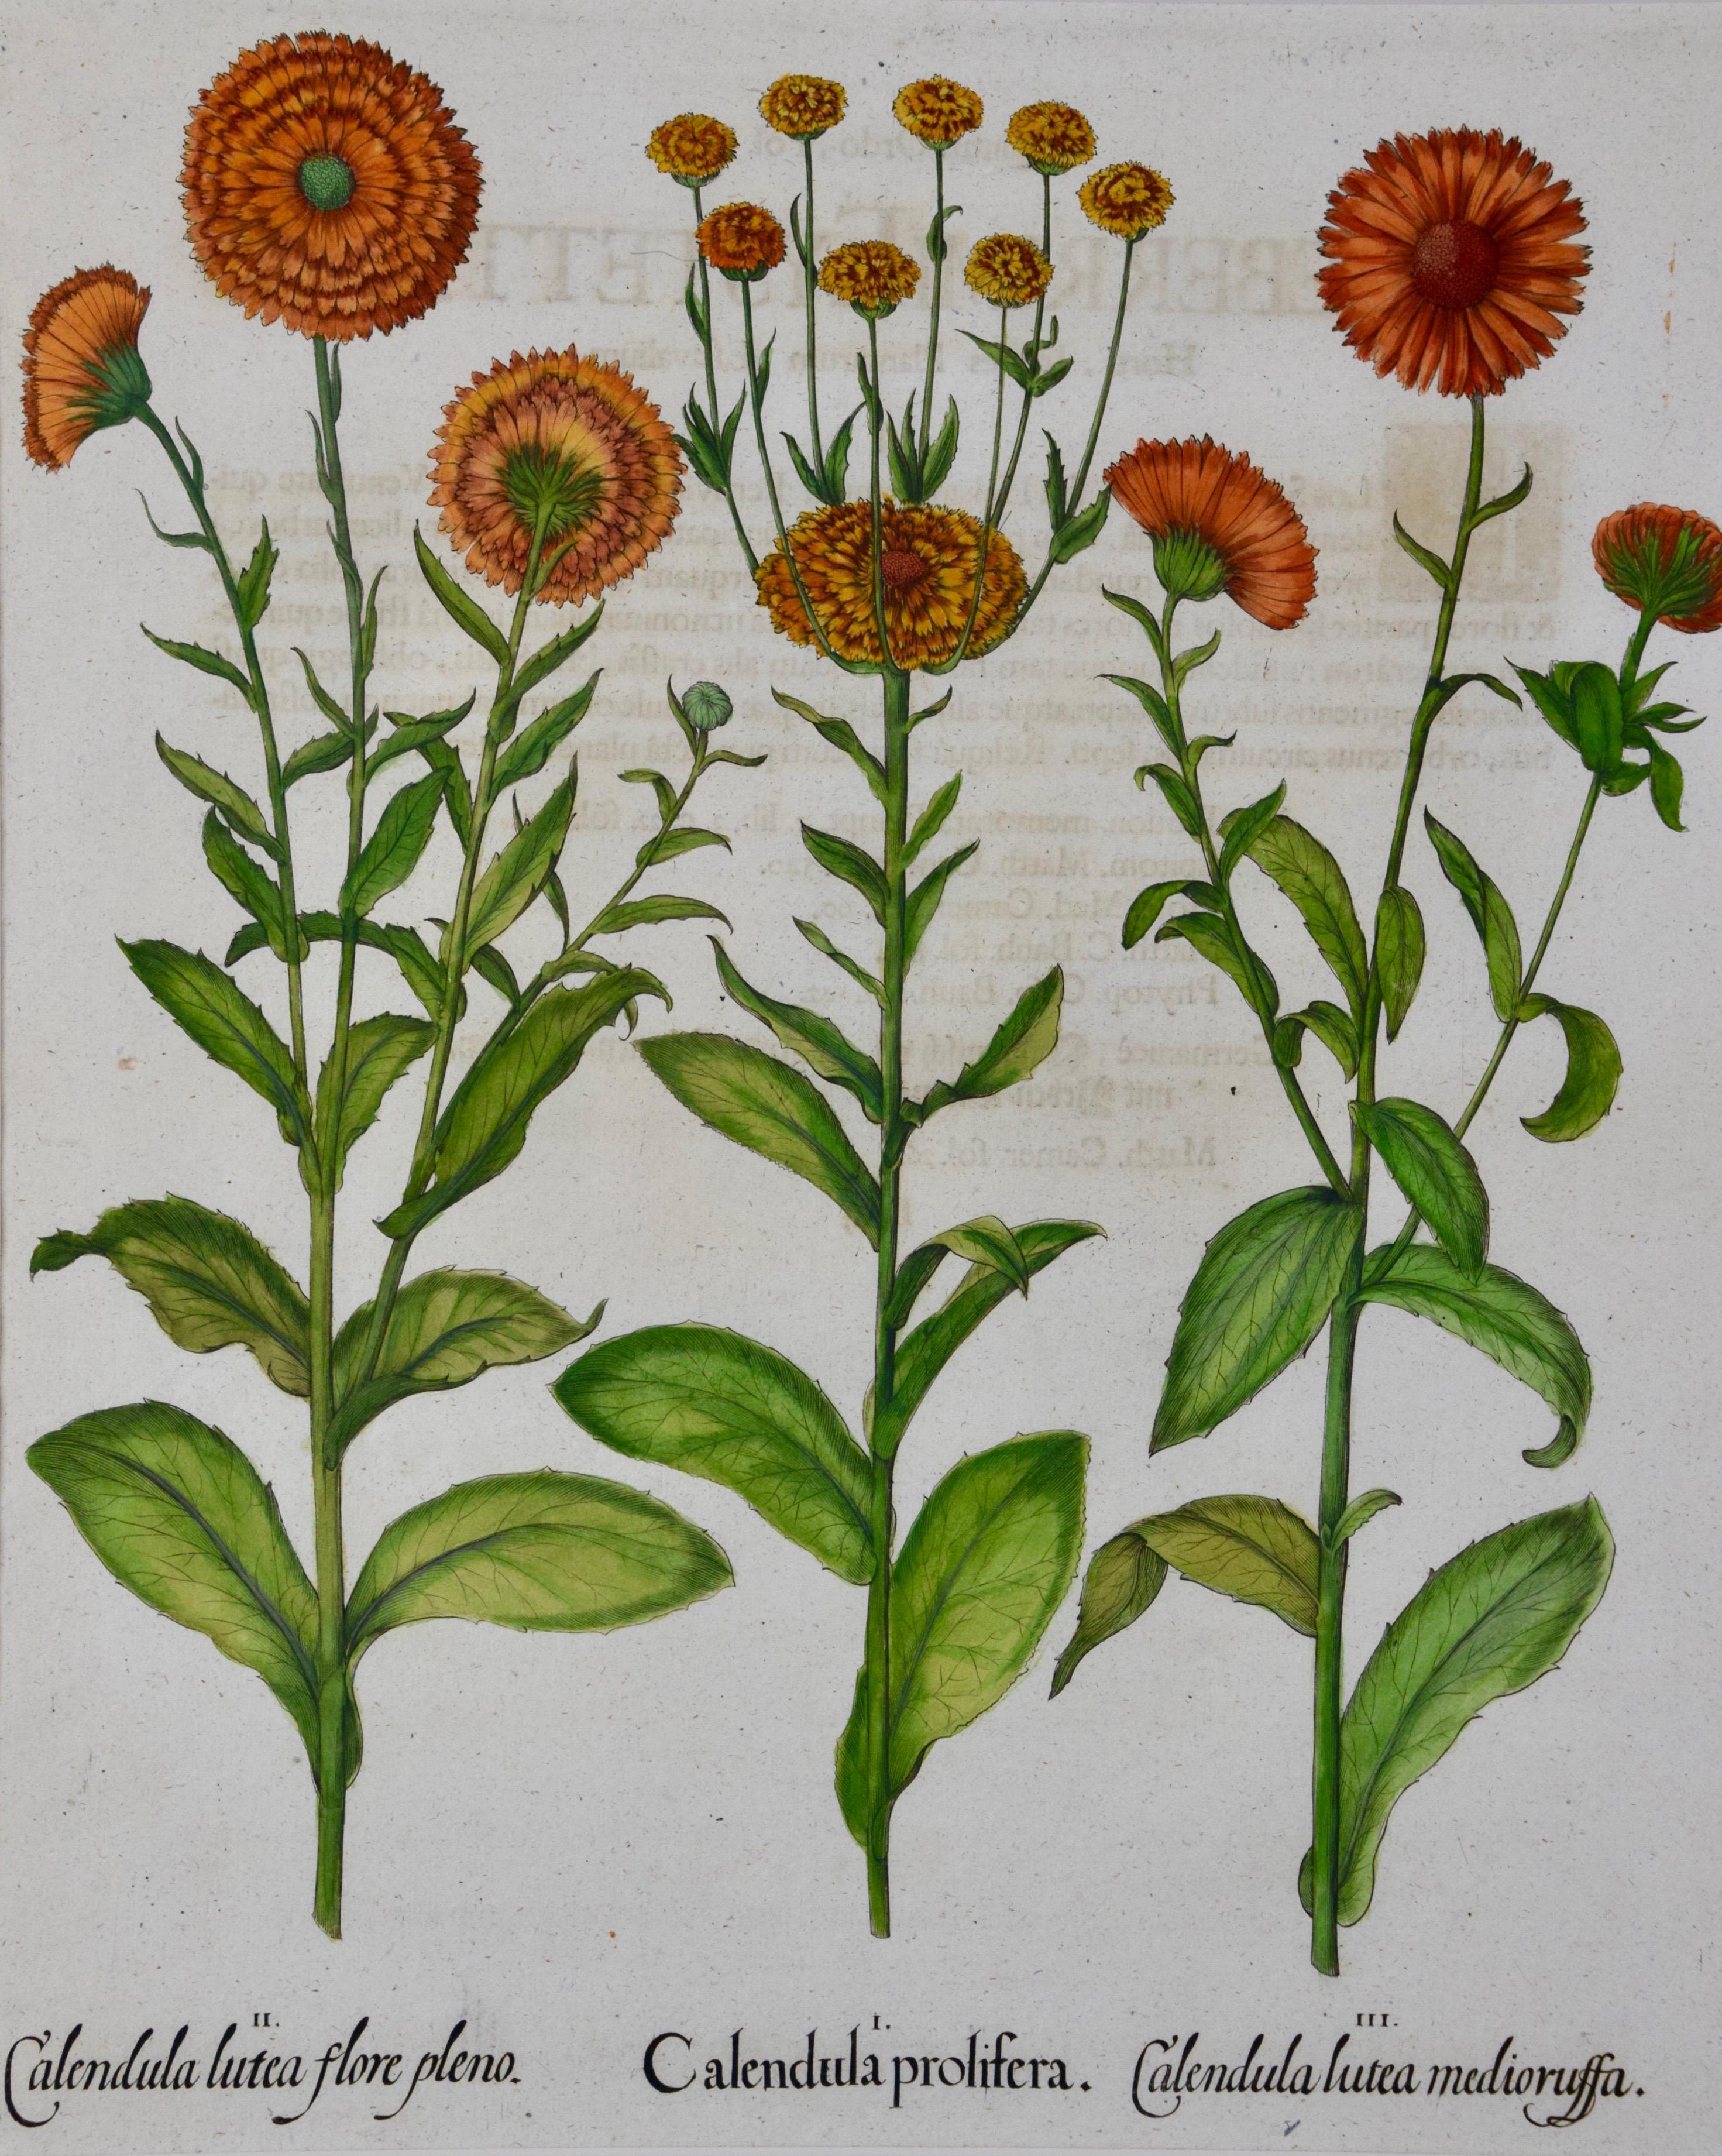 Calendula Flowers: An 18th Century Hand-colored Botanical Engraving by B. Besler - Print by Basilius Besler